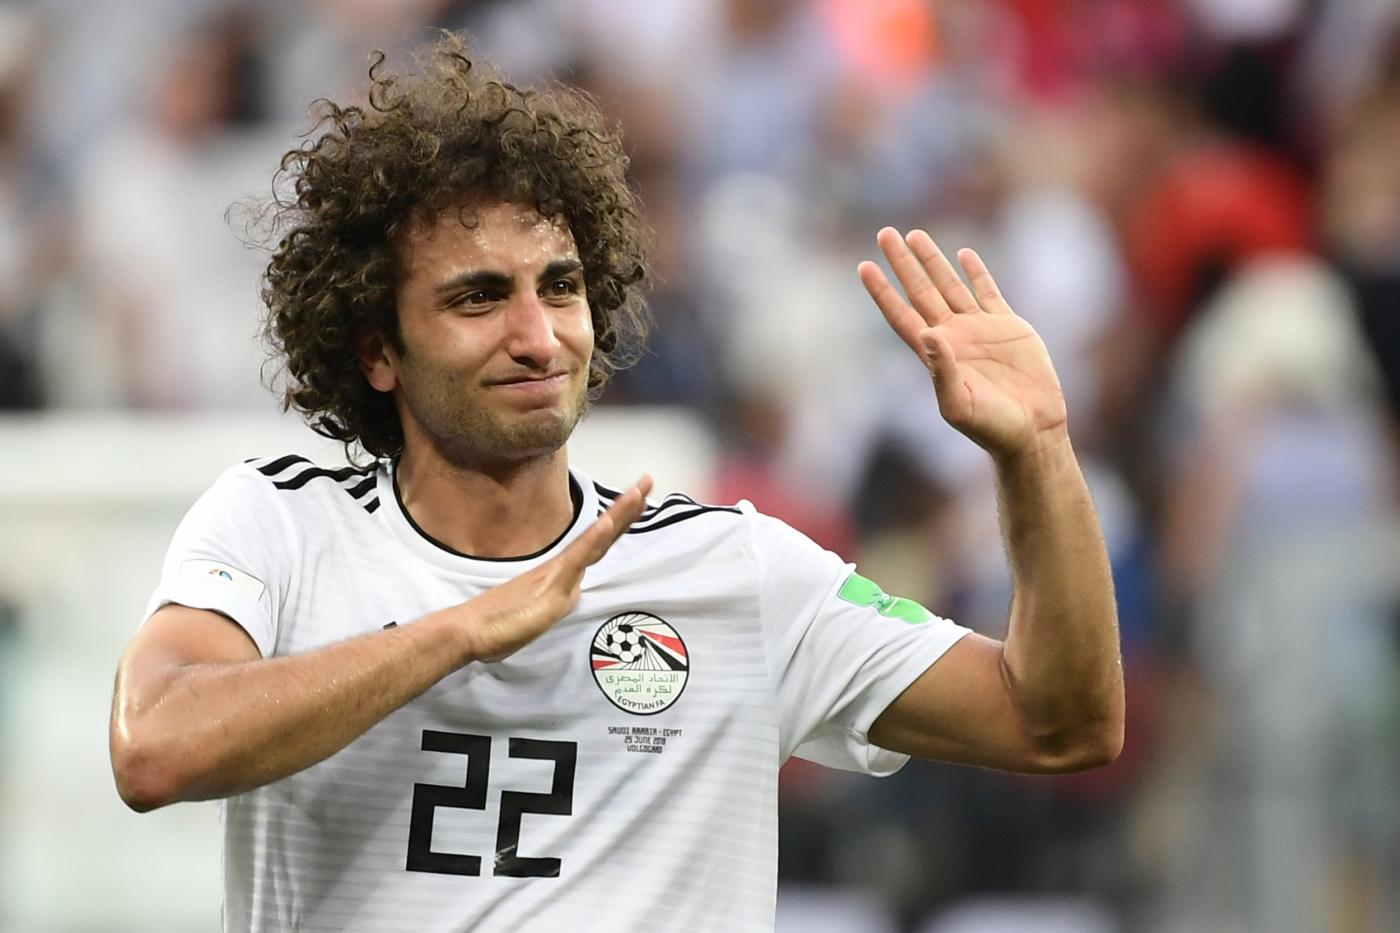 Amr Warda has come under fire over claims that he sexually harassed several women online (AFP)